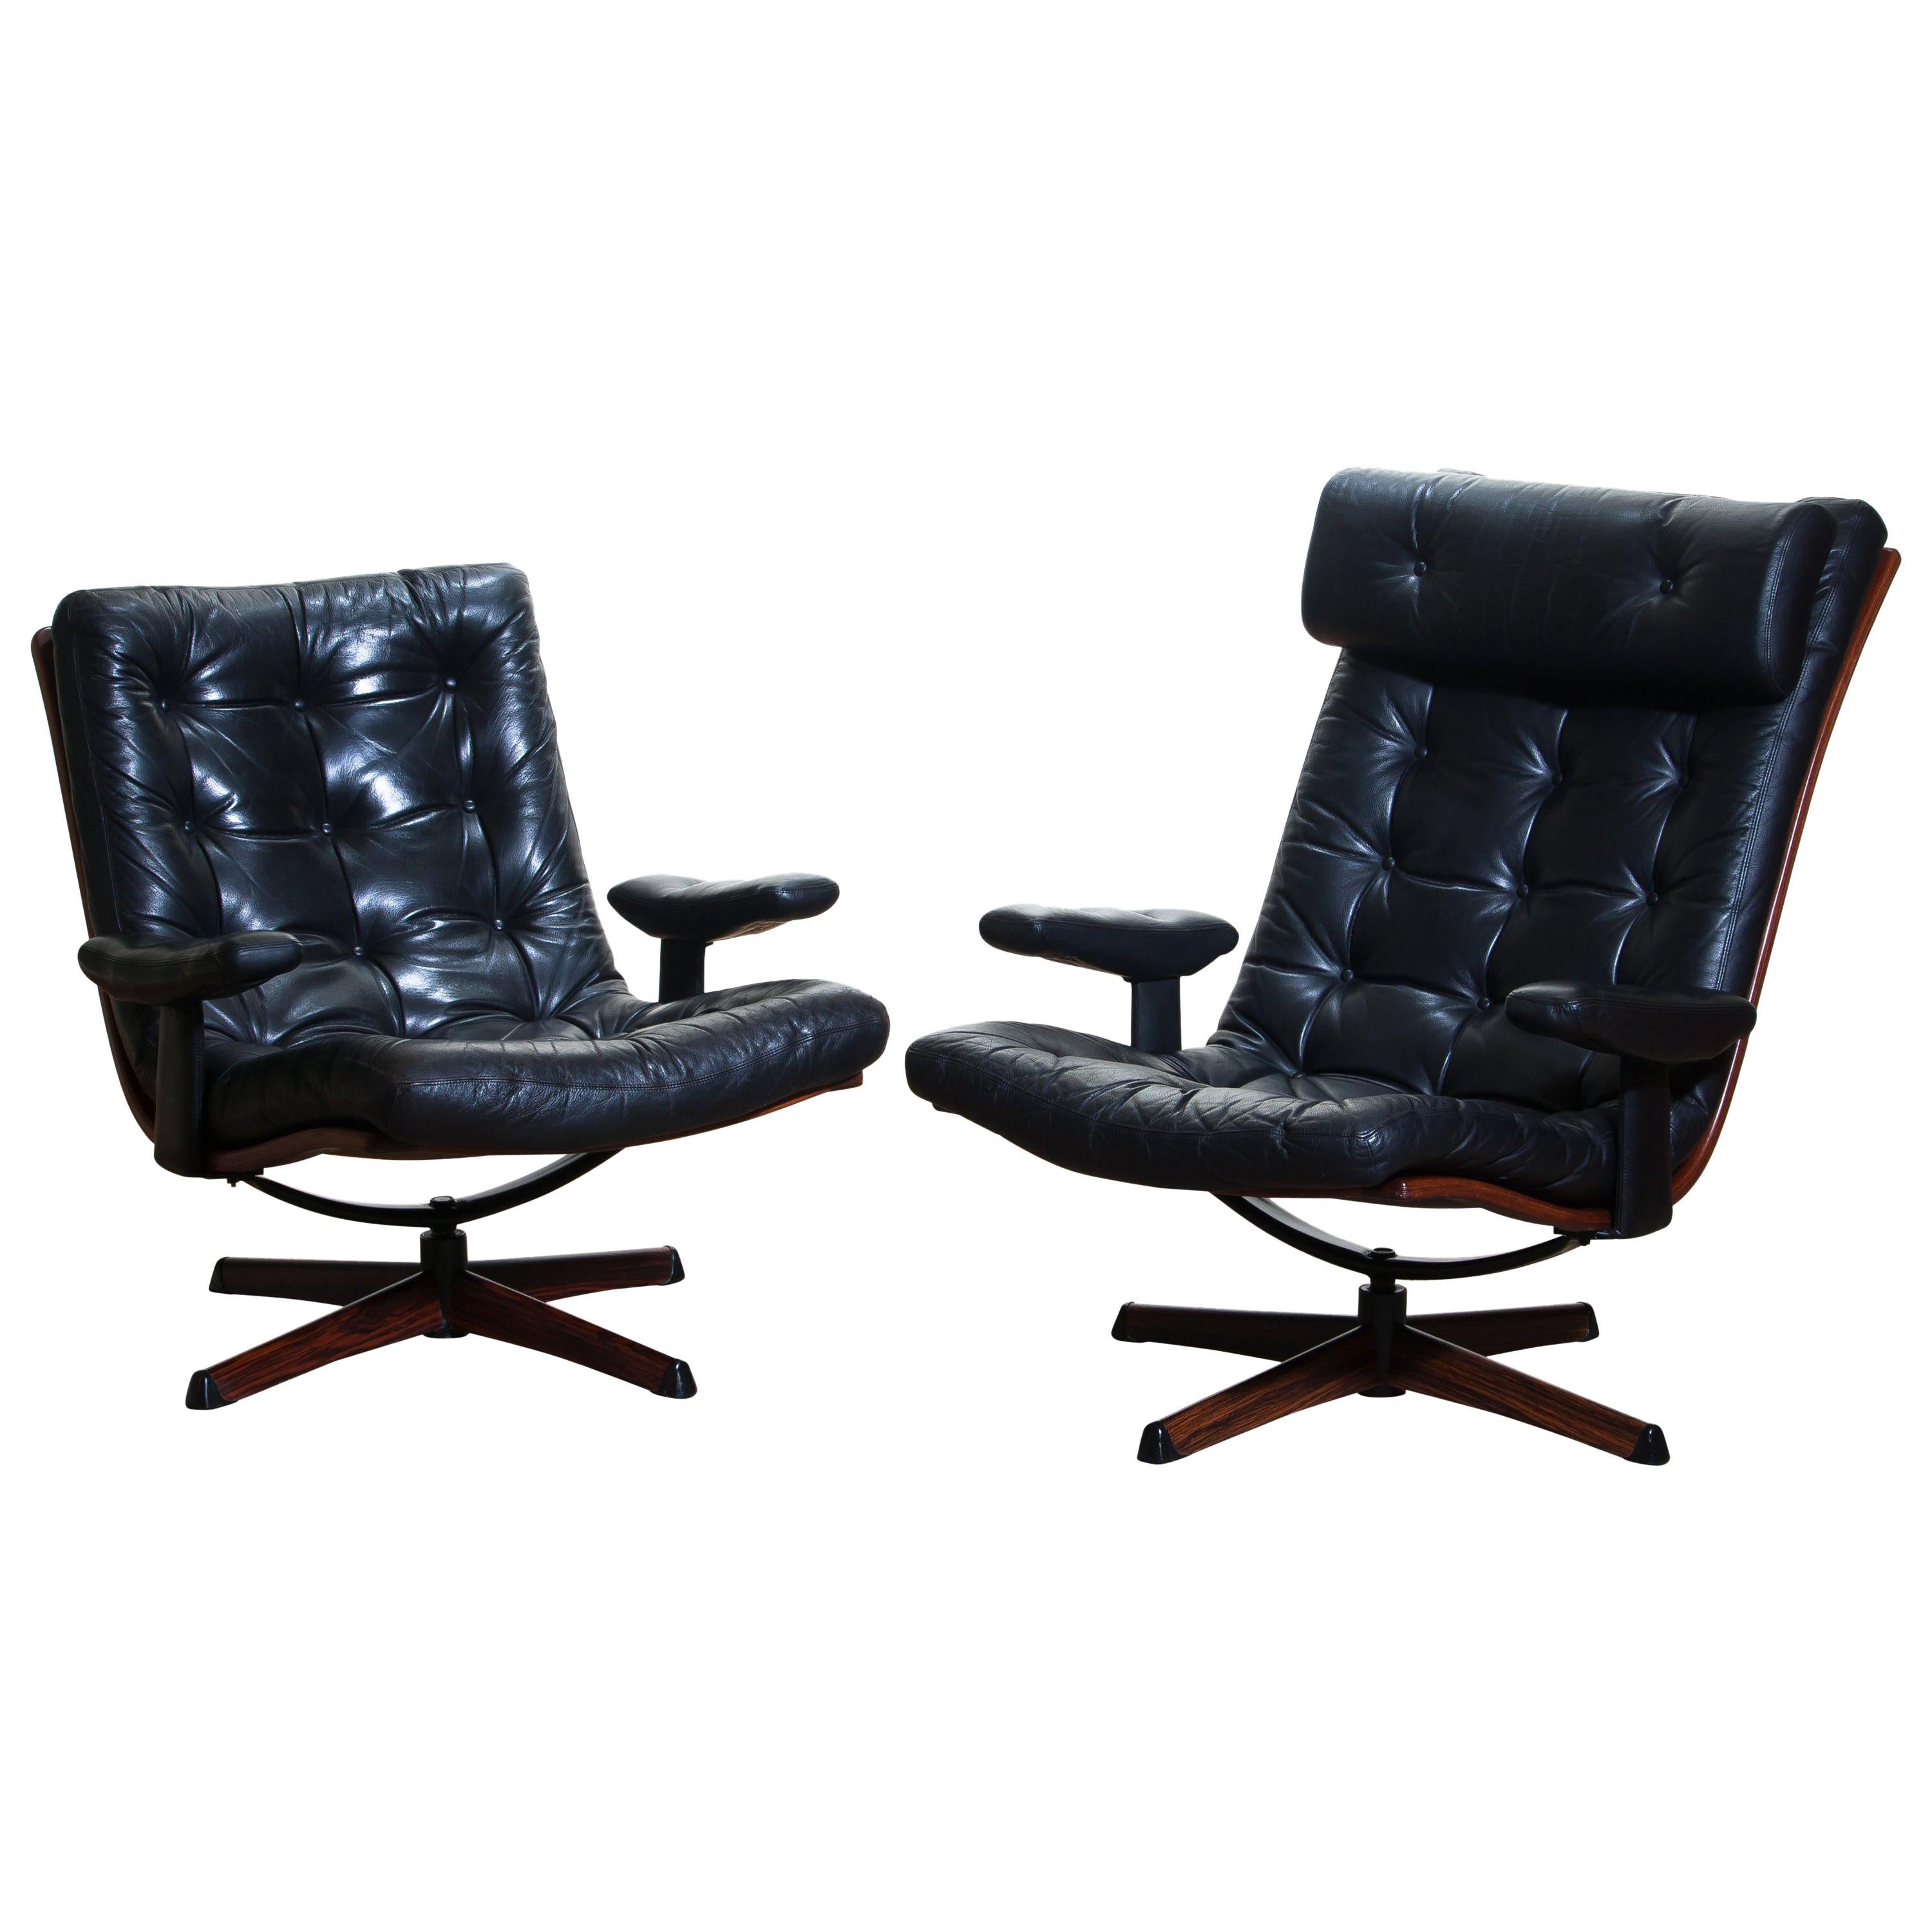 Swedish 1960s Matching Pair of Black Leather Swivel Chairs by Gote Design Nassjo Sweden